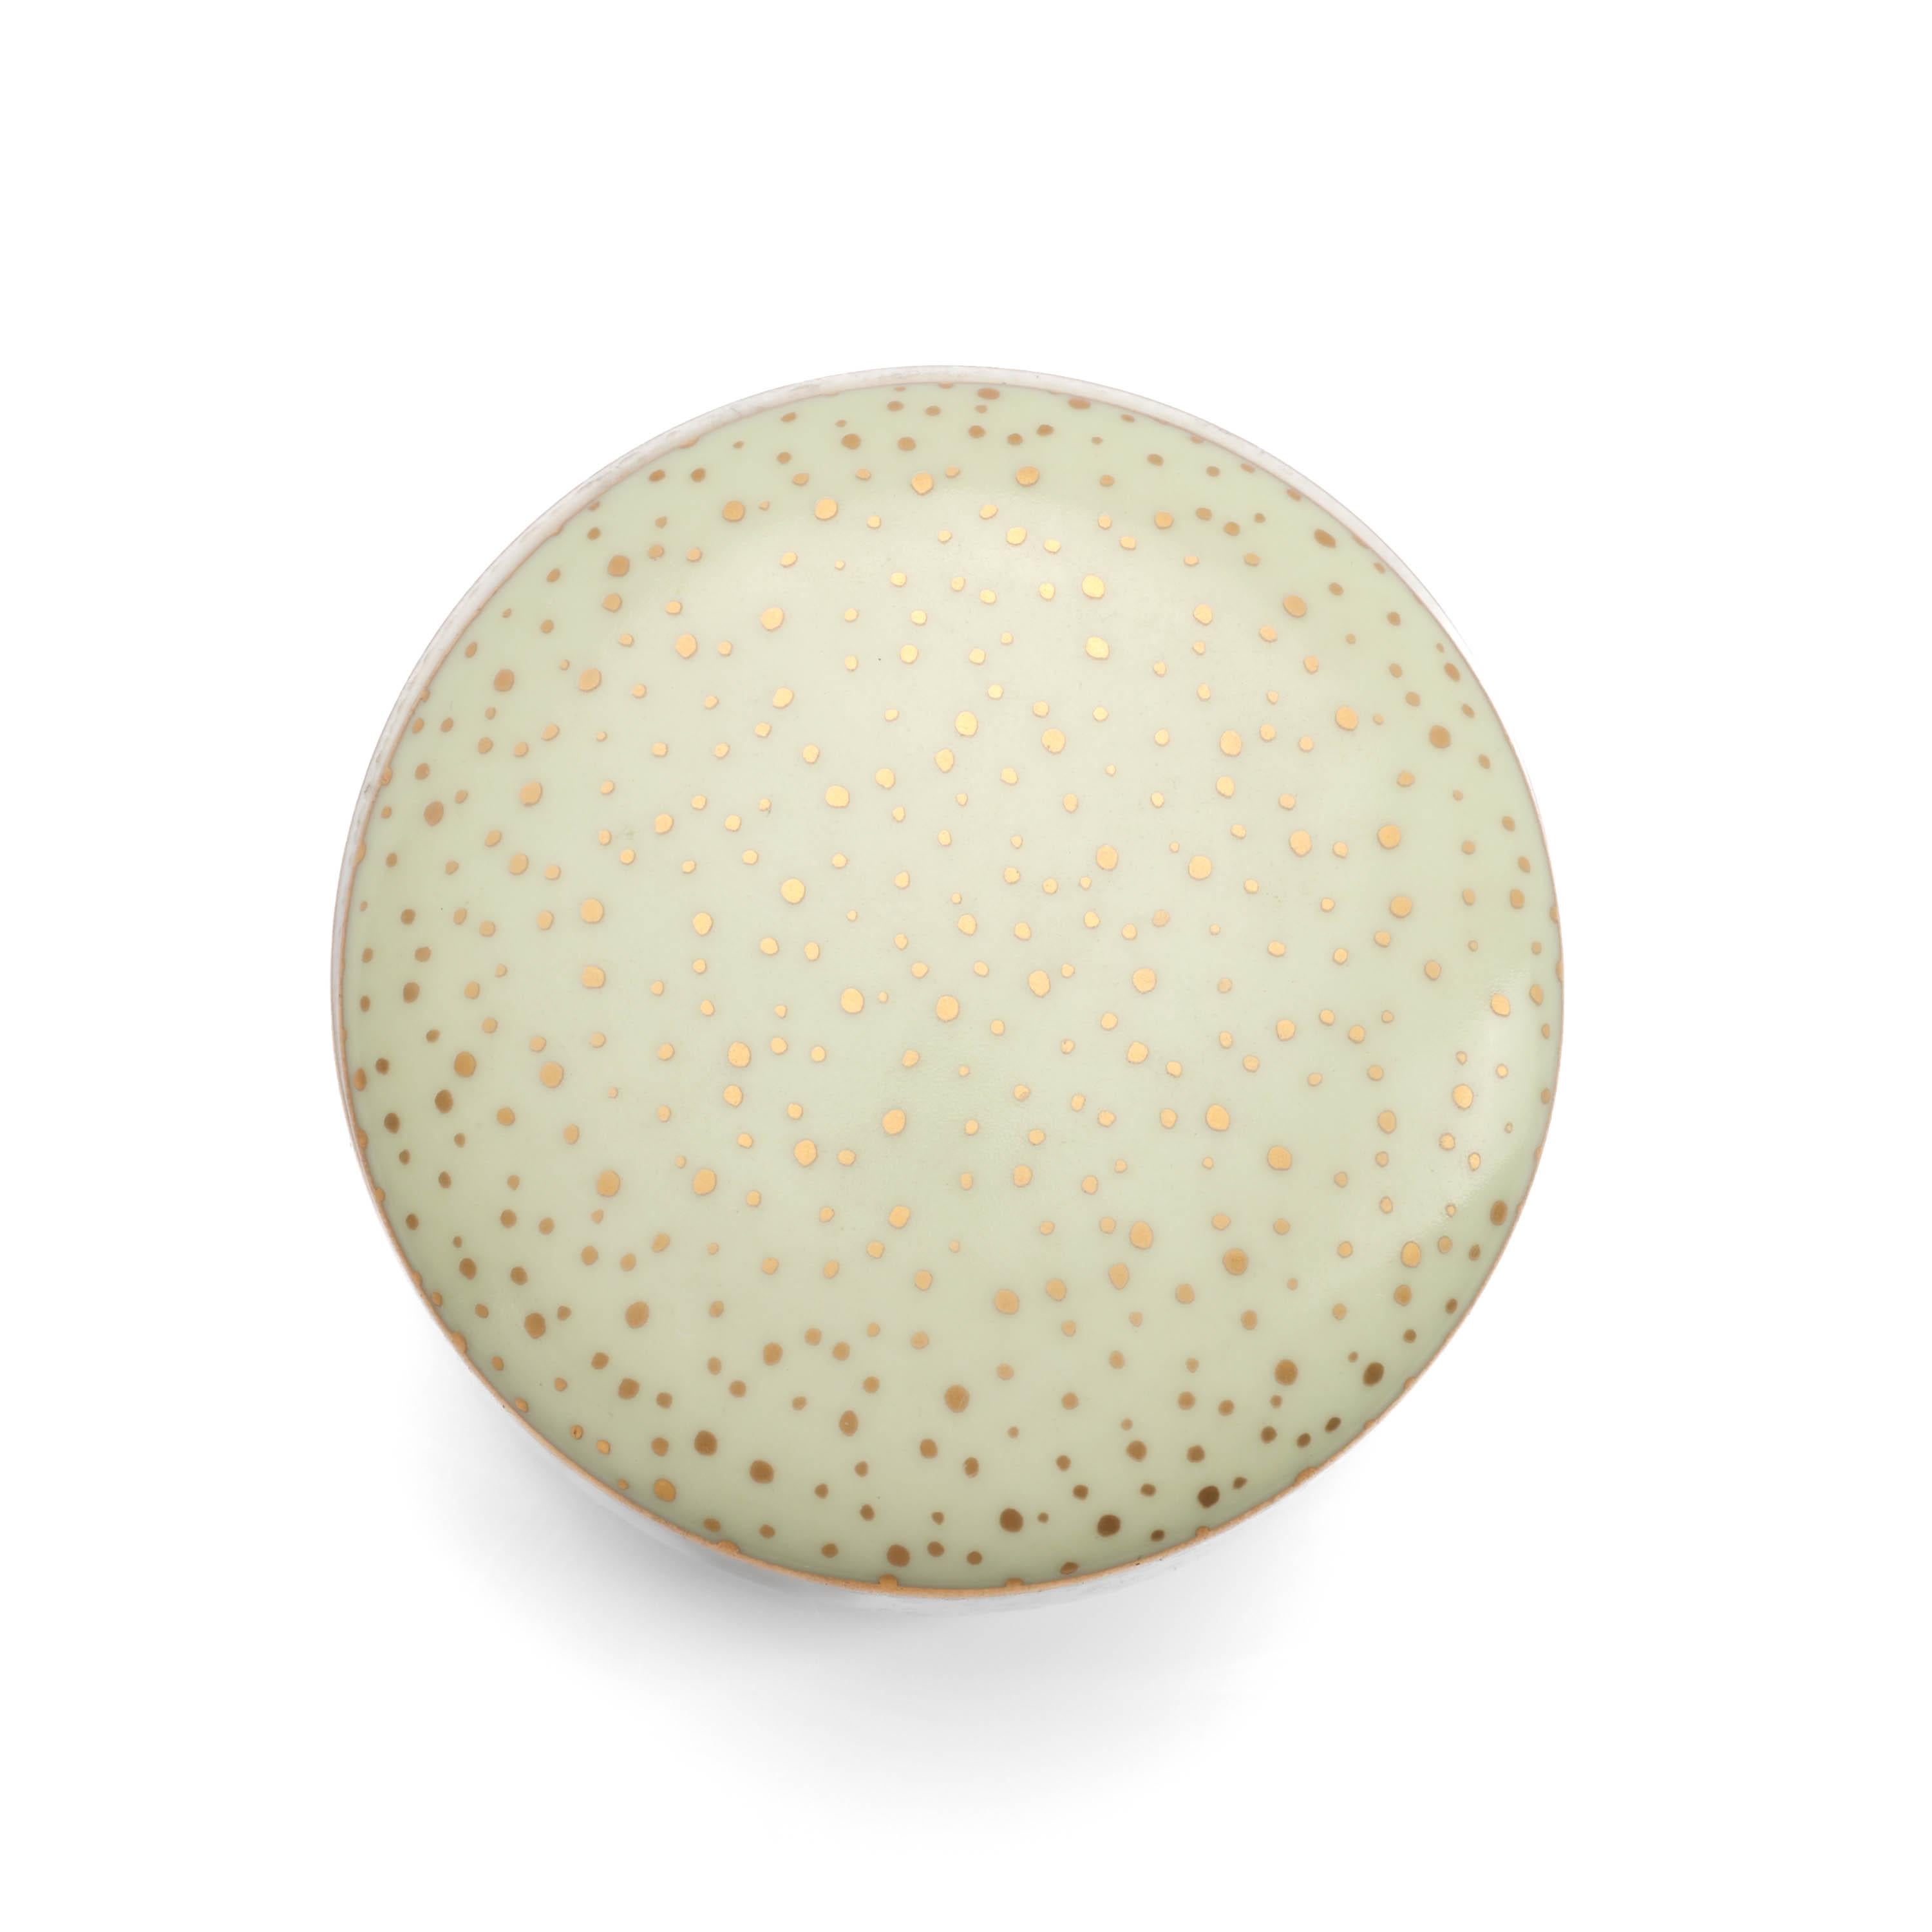 This round Tiffany & Co. porcelain box in celadon green with variable-sized gold dots measures 70mm across 51mm top to bottom, including the lid. Making it the perfect size to hold your rings at night or your diamond stud earrings. Or store your